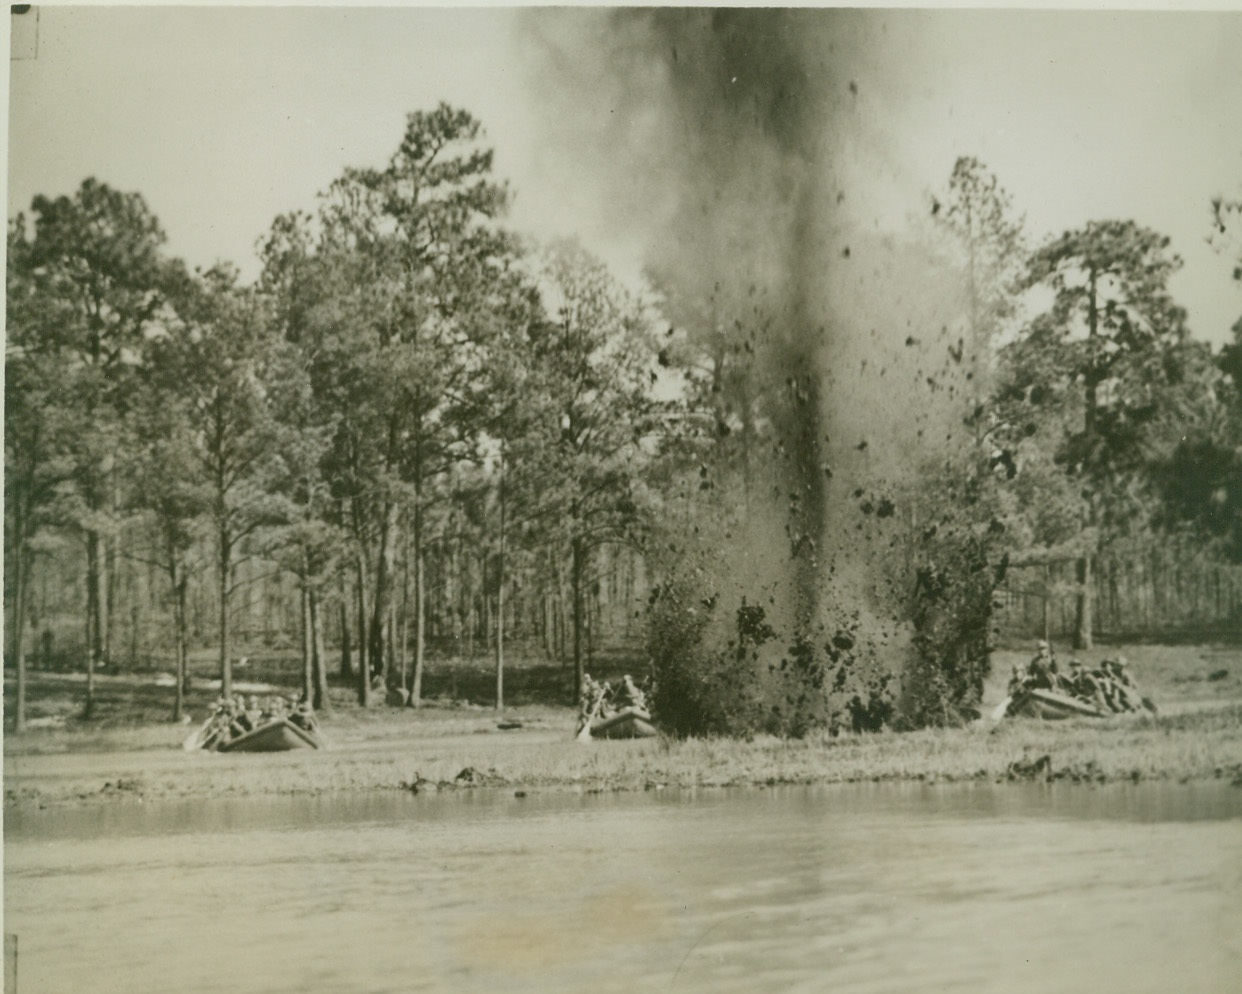 Uncle Sam’s ‘Invasion’ Troops in Training, 3/22/1942. Ft. Bragg, N.C.—Blast from charge of explosives set off in the water sends mud flying as troops of the 9th Infantry Division approach shore. These soldiers are being especially schooled in amphibious training with the use of rubber boats. Credit: ACME.;